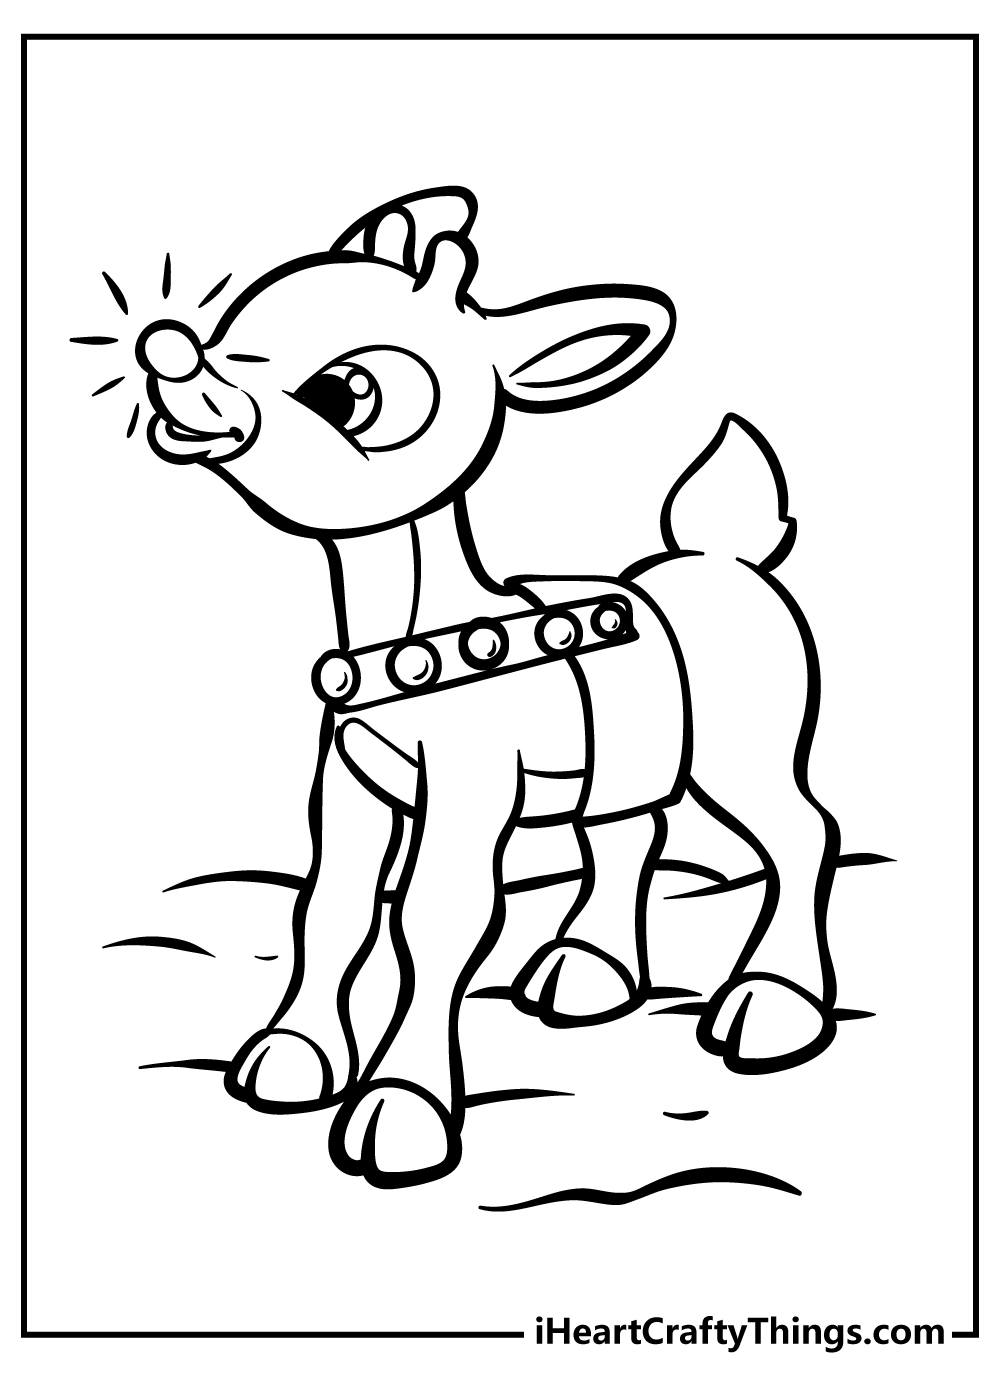 Rudolph Coloring Pages for kids free download